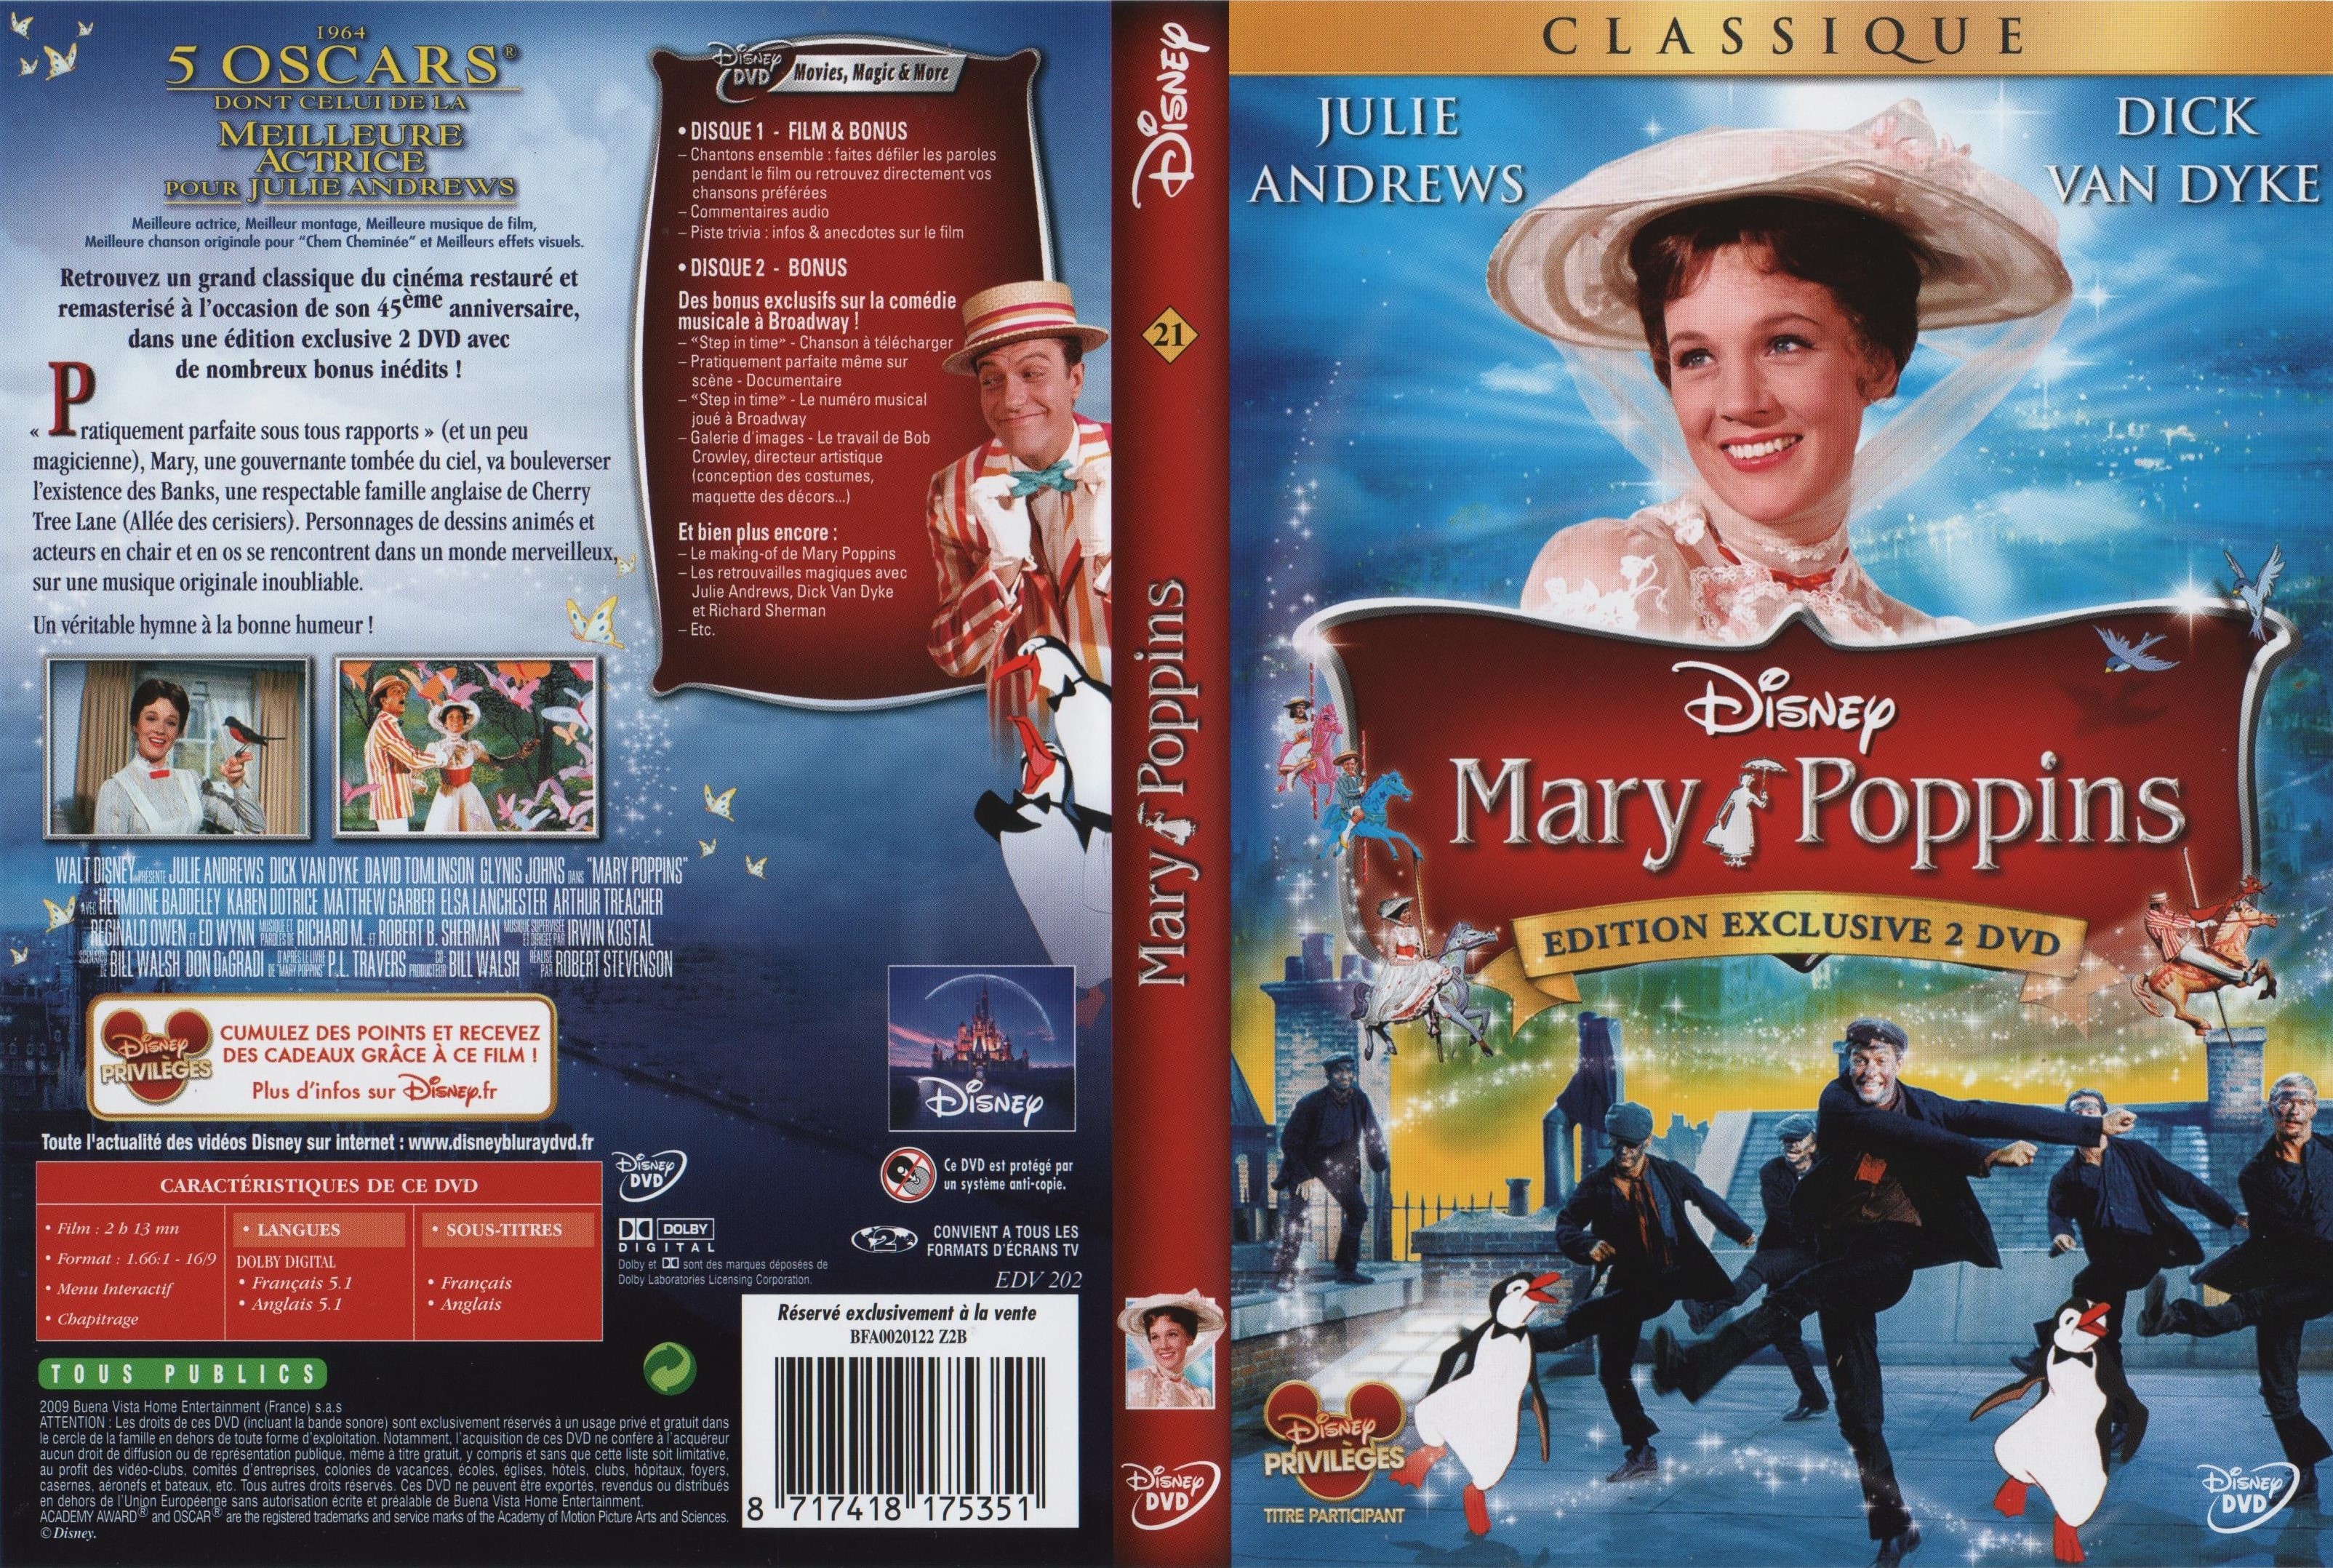 Jaquette DVD Mary Poppins v4